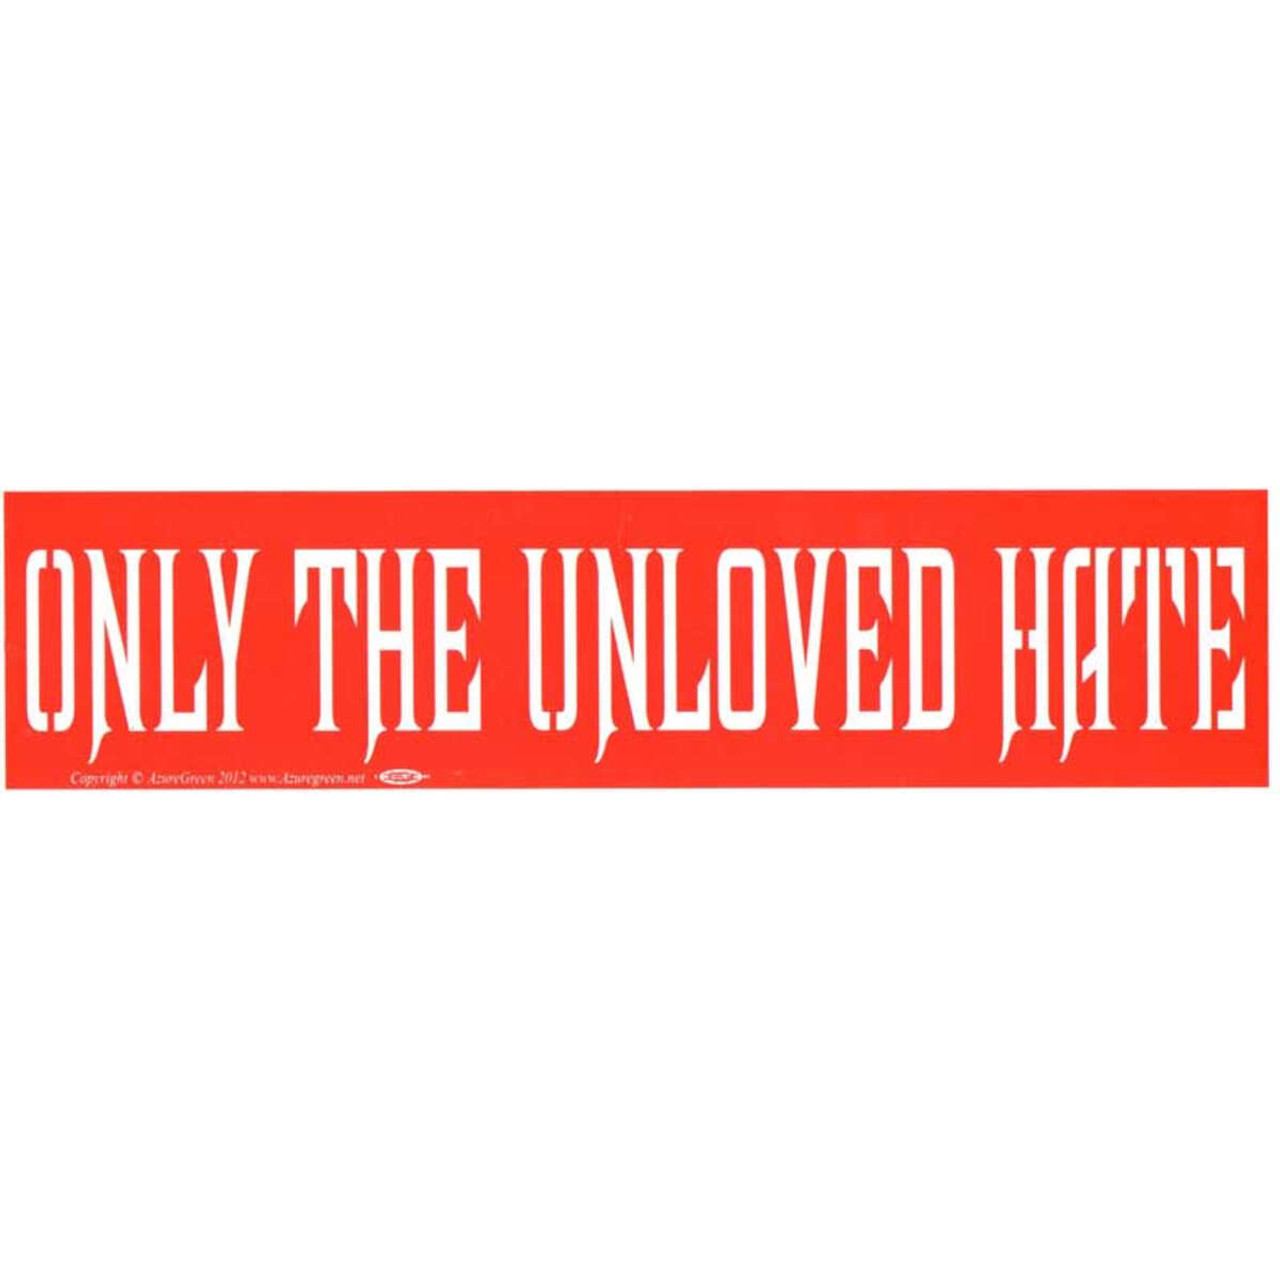 Only the Unloved Hate Bumper Sticker